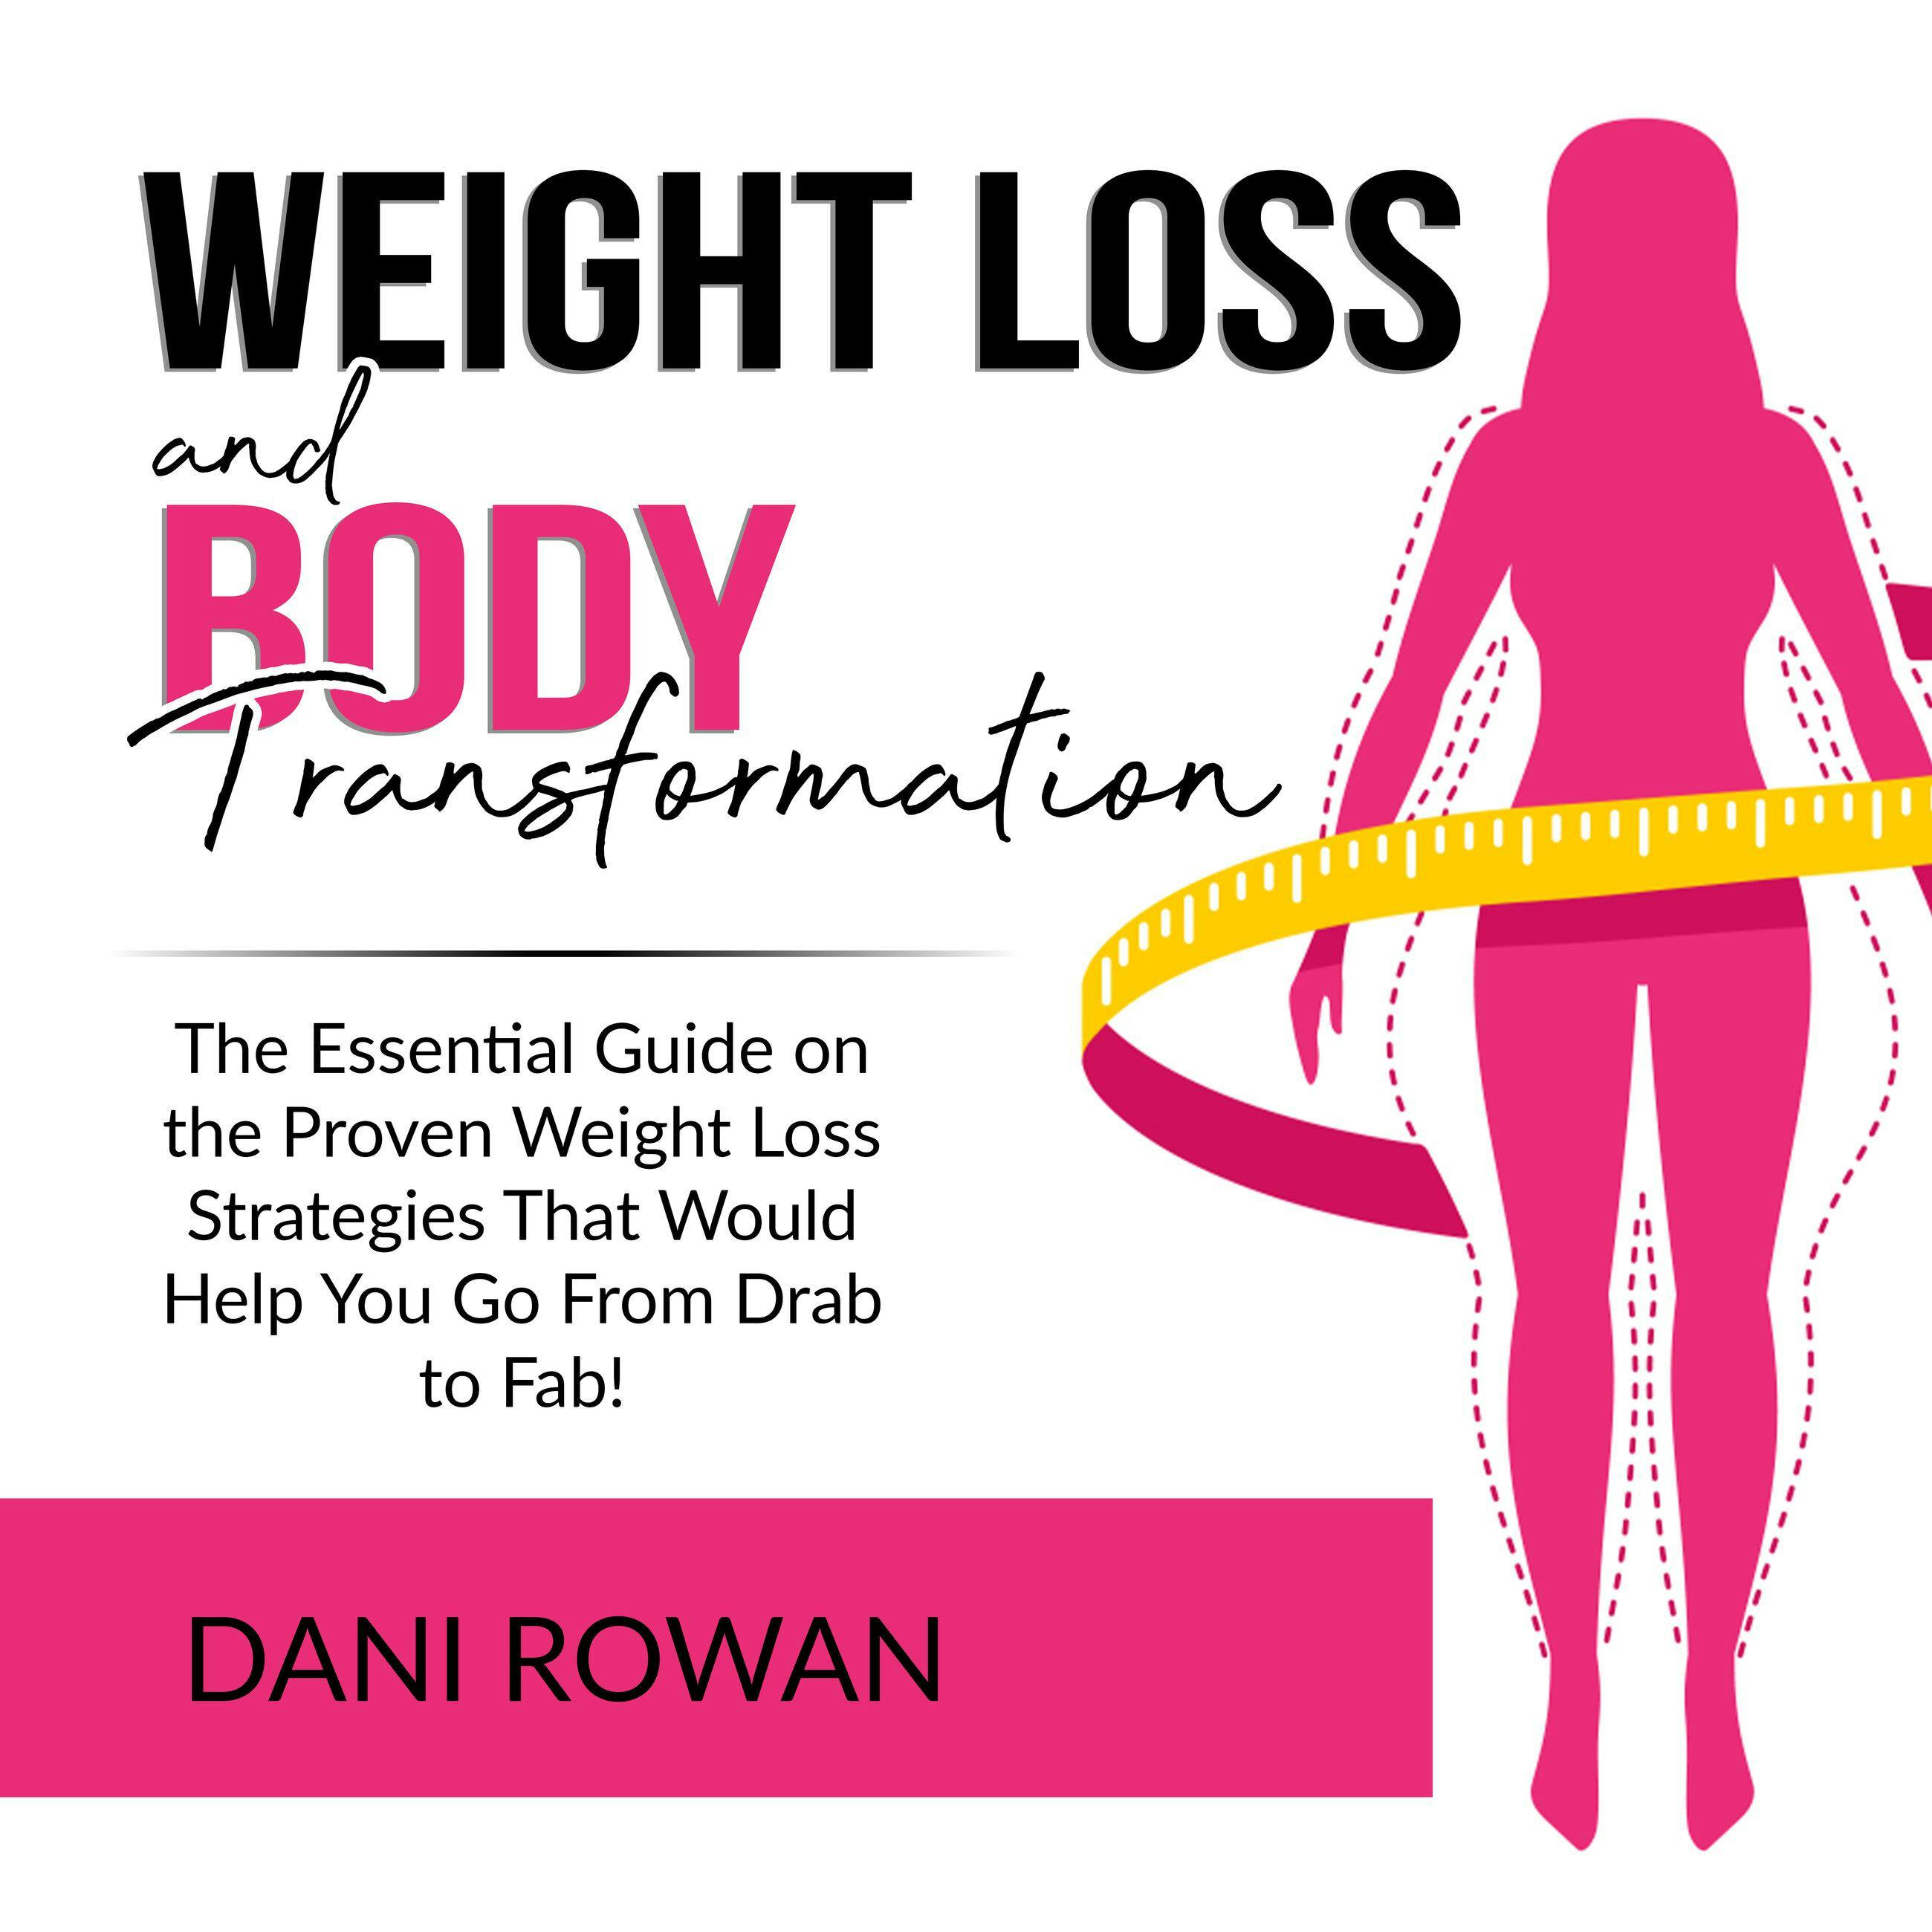 Weight Loss and Body Transformation: The Essential Guide on the Proven Weight Loss Strategies That Would Help You Go From Drab to Fab! - undefined